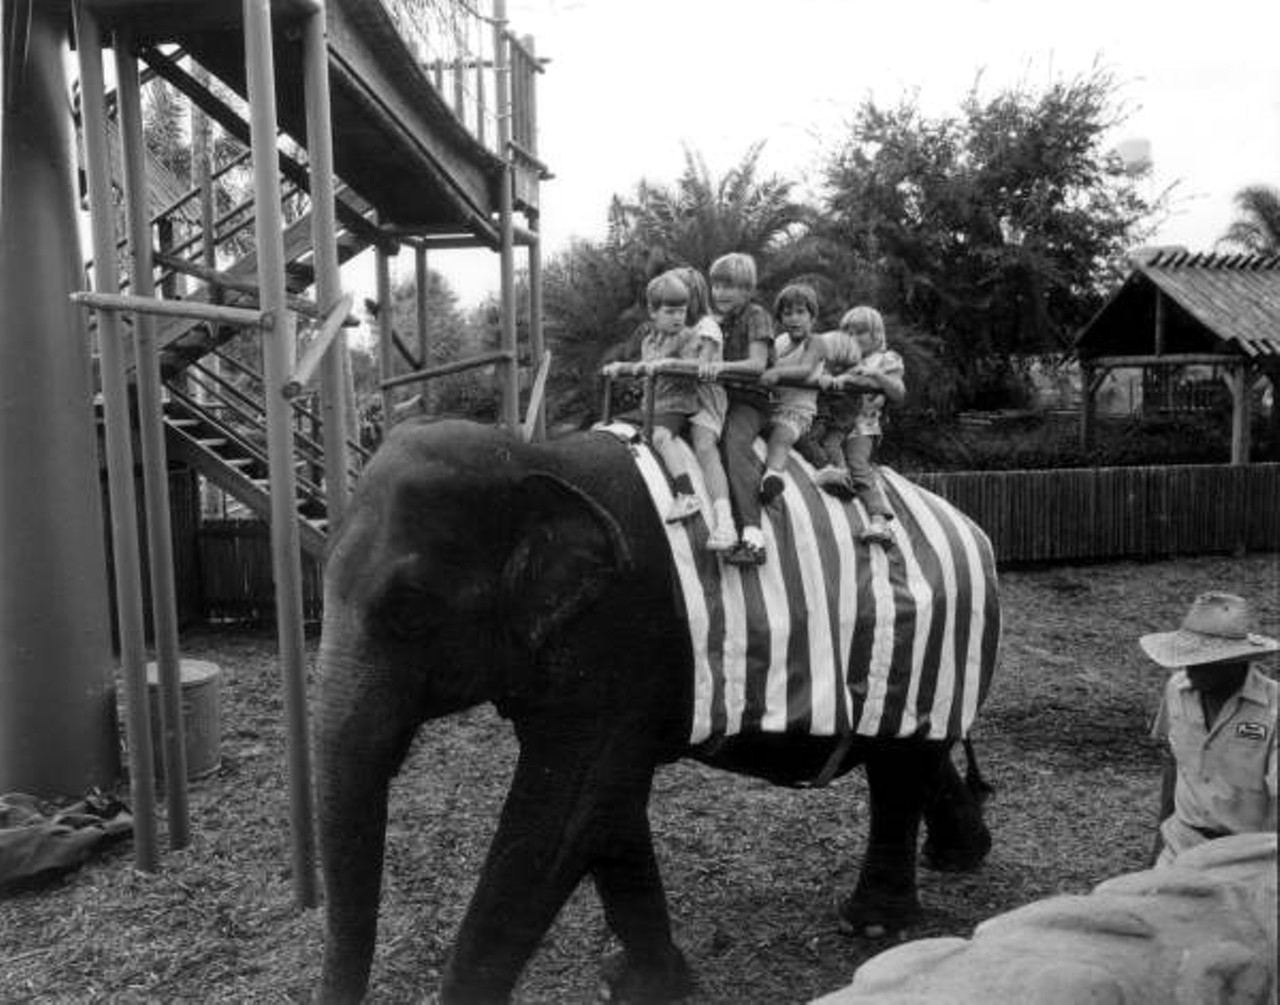 60 years of thrills: These vintage photos of Busch Gardens Tampa show ...